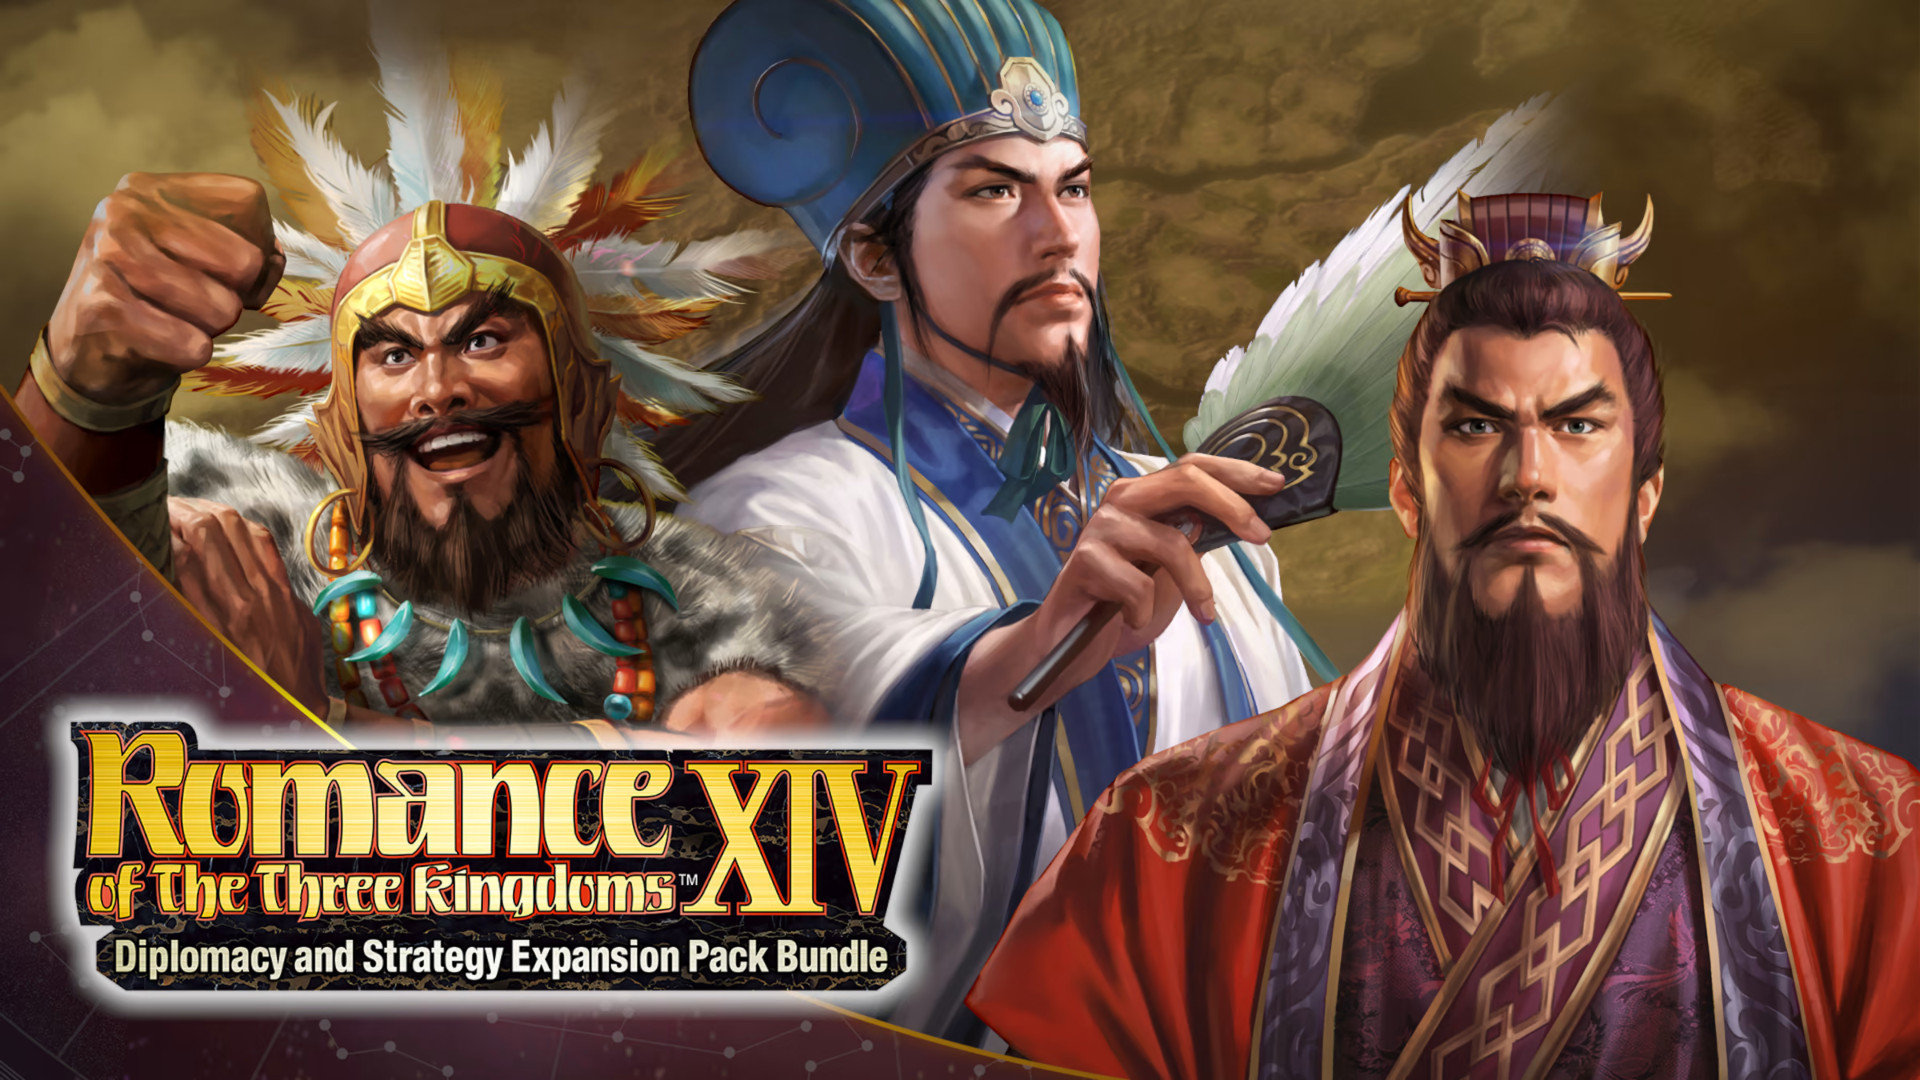 Romance of the Three Kingdoms XIV - Diplomacy and Strategy Expansion Pack DLC Steam CD key 39.55 usd